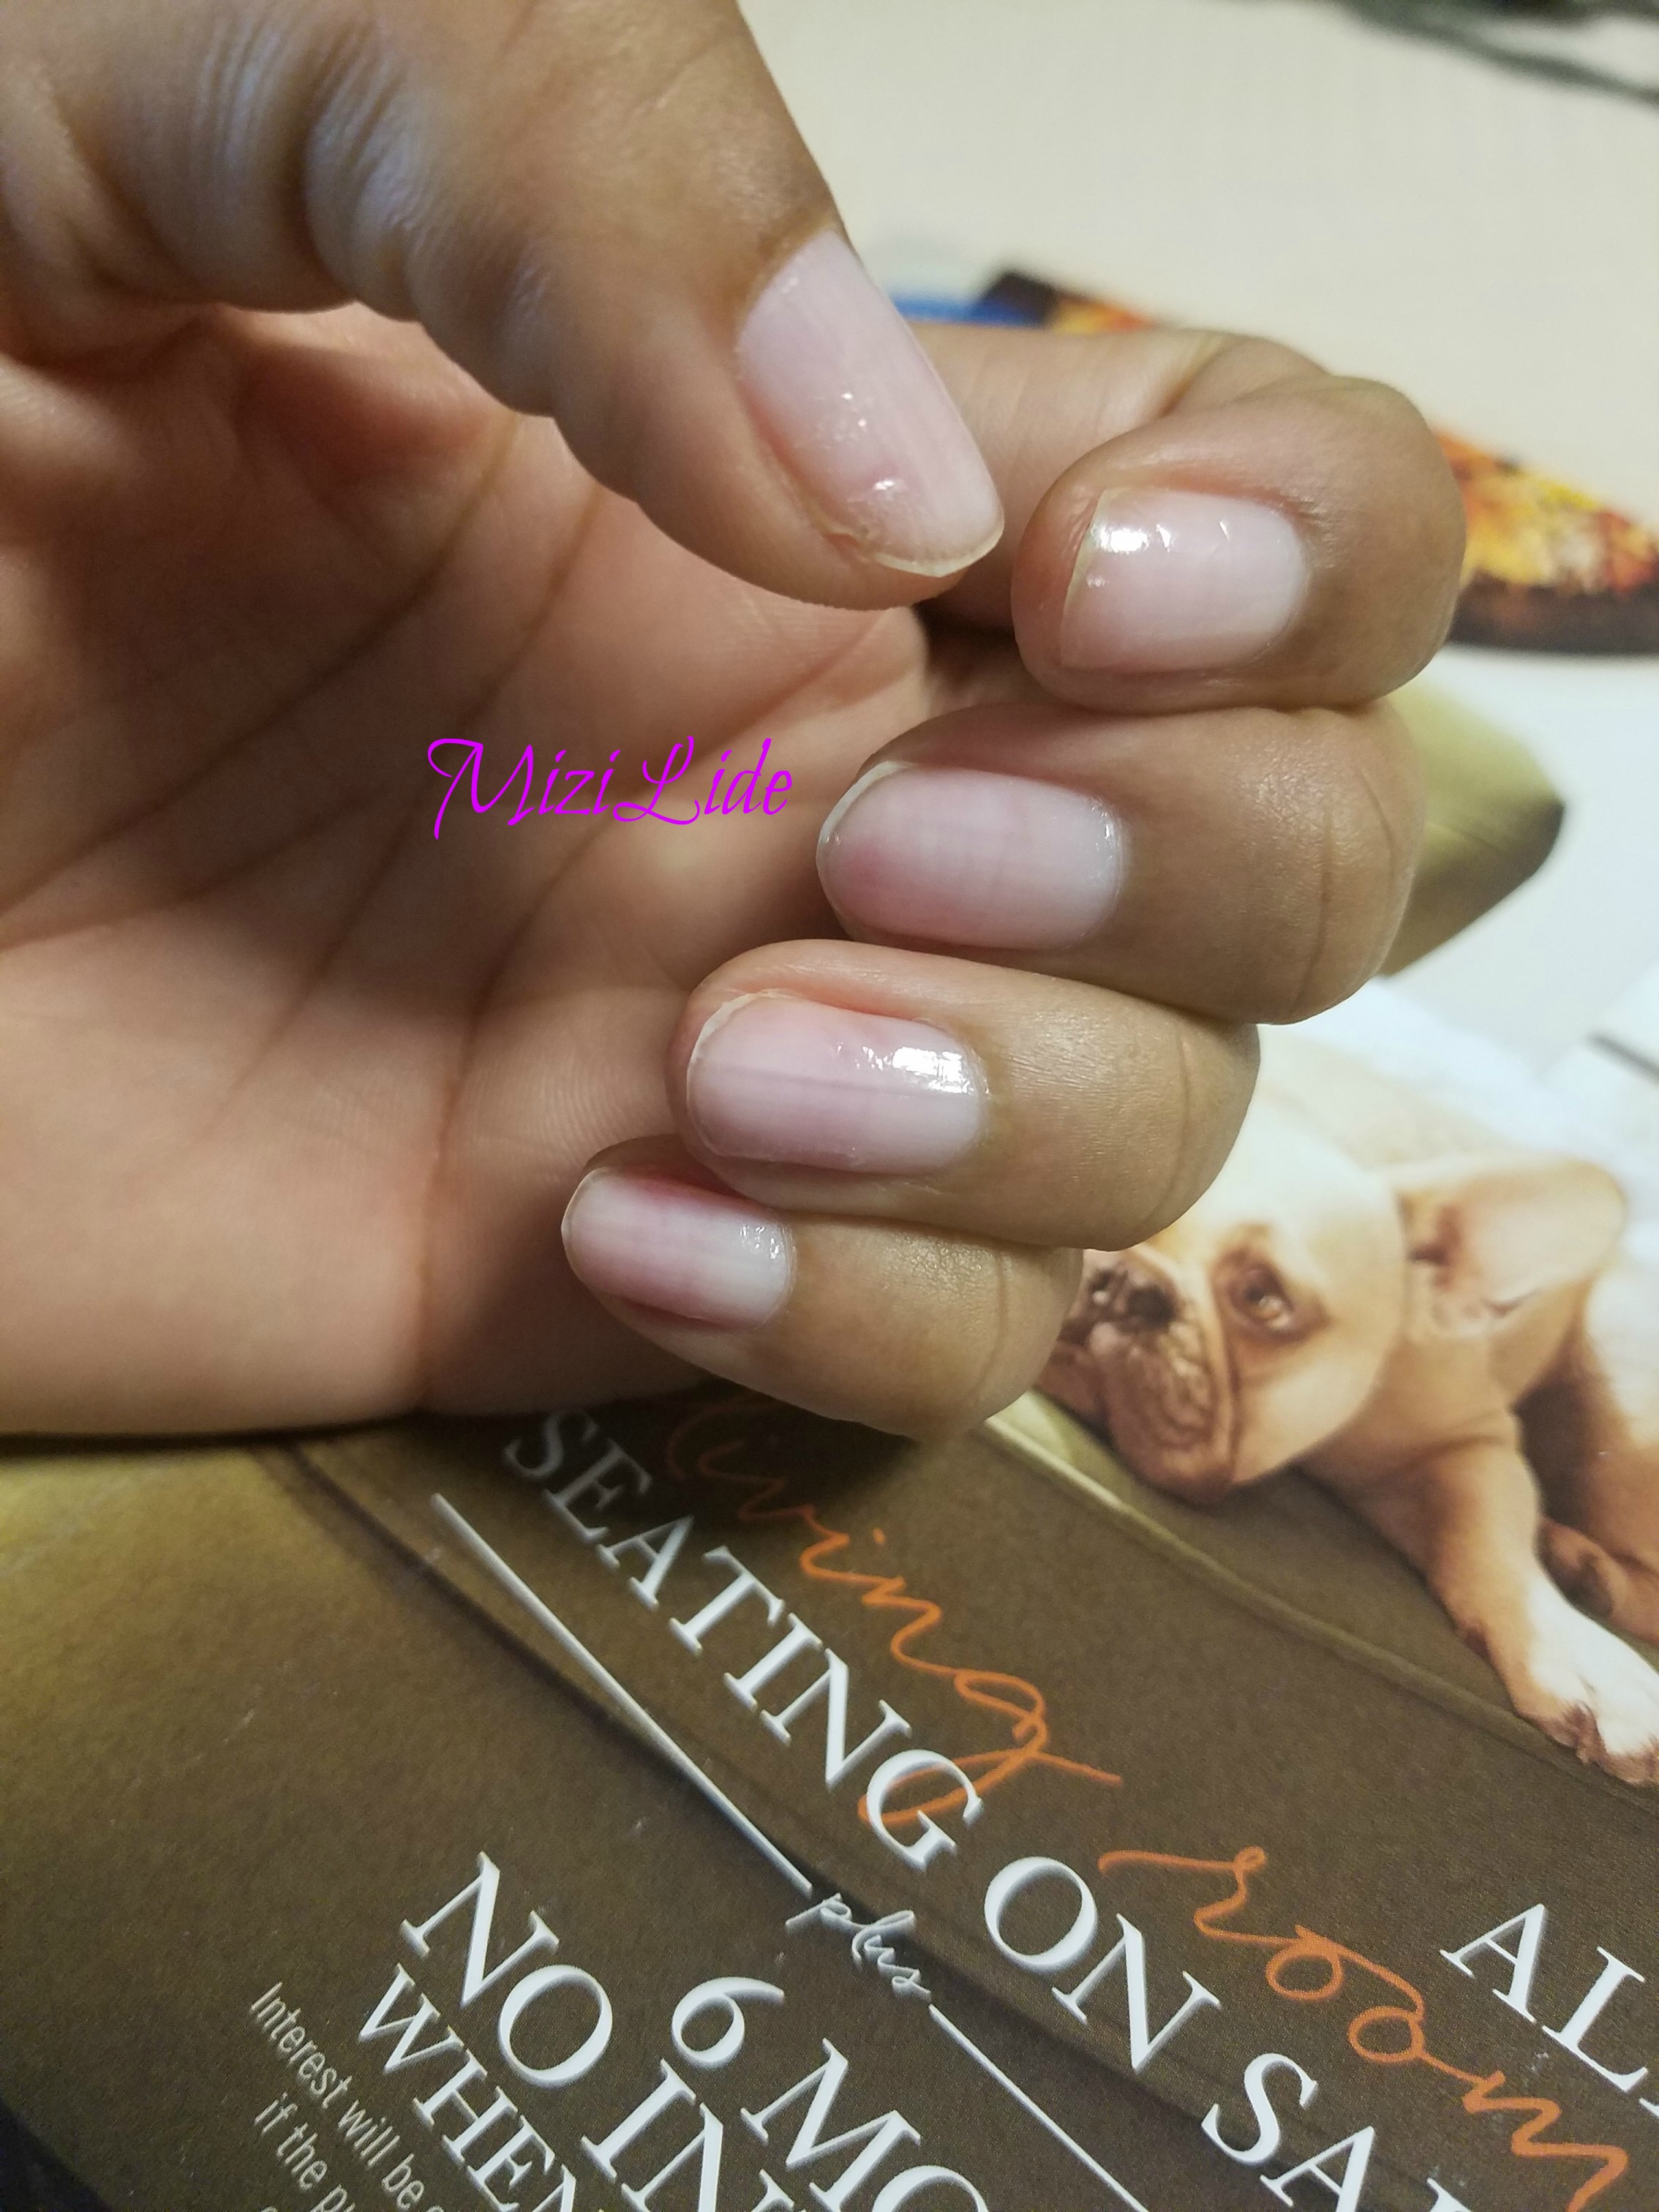 Danni's nails after july 08.Natural tipped with clear gel overlay. | Salon  Geek - Salon Professionals Forum